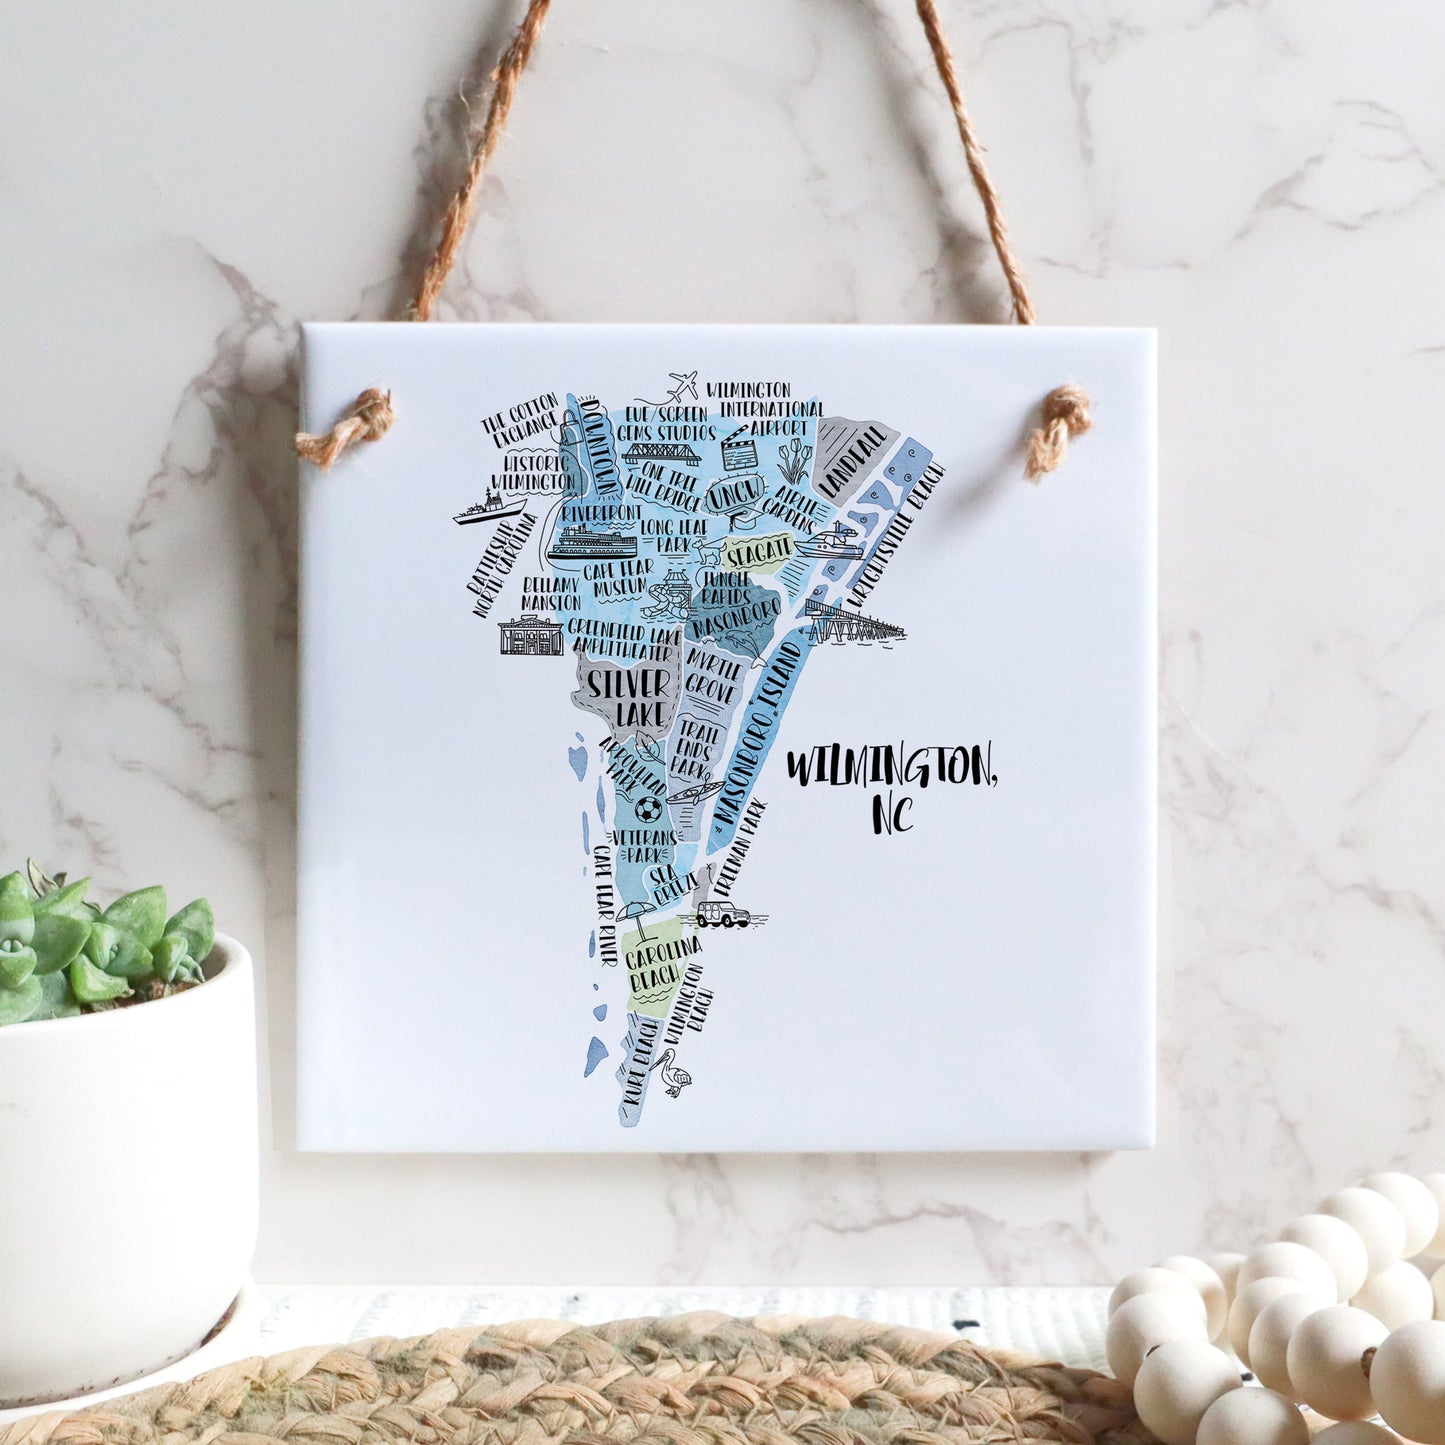 A hand-drawn tourist map of Wilmington North Carolina on a square tile sign hanging on a wall - in the color blue